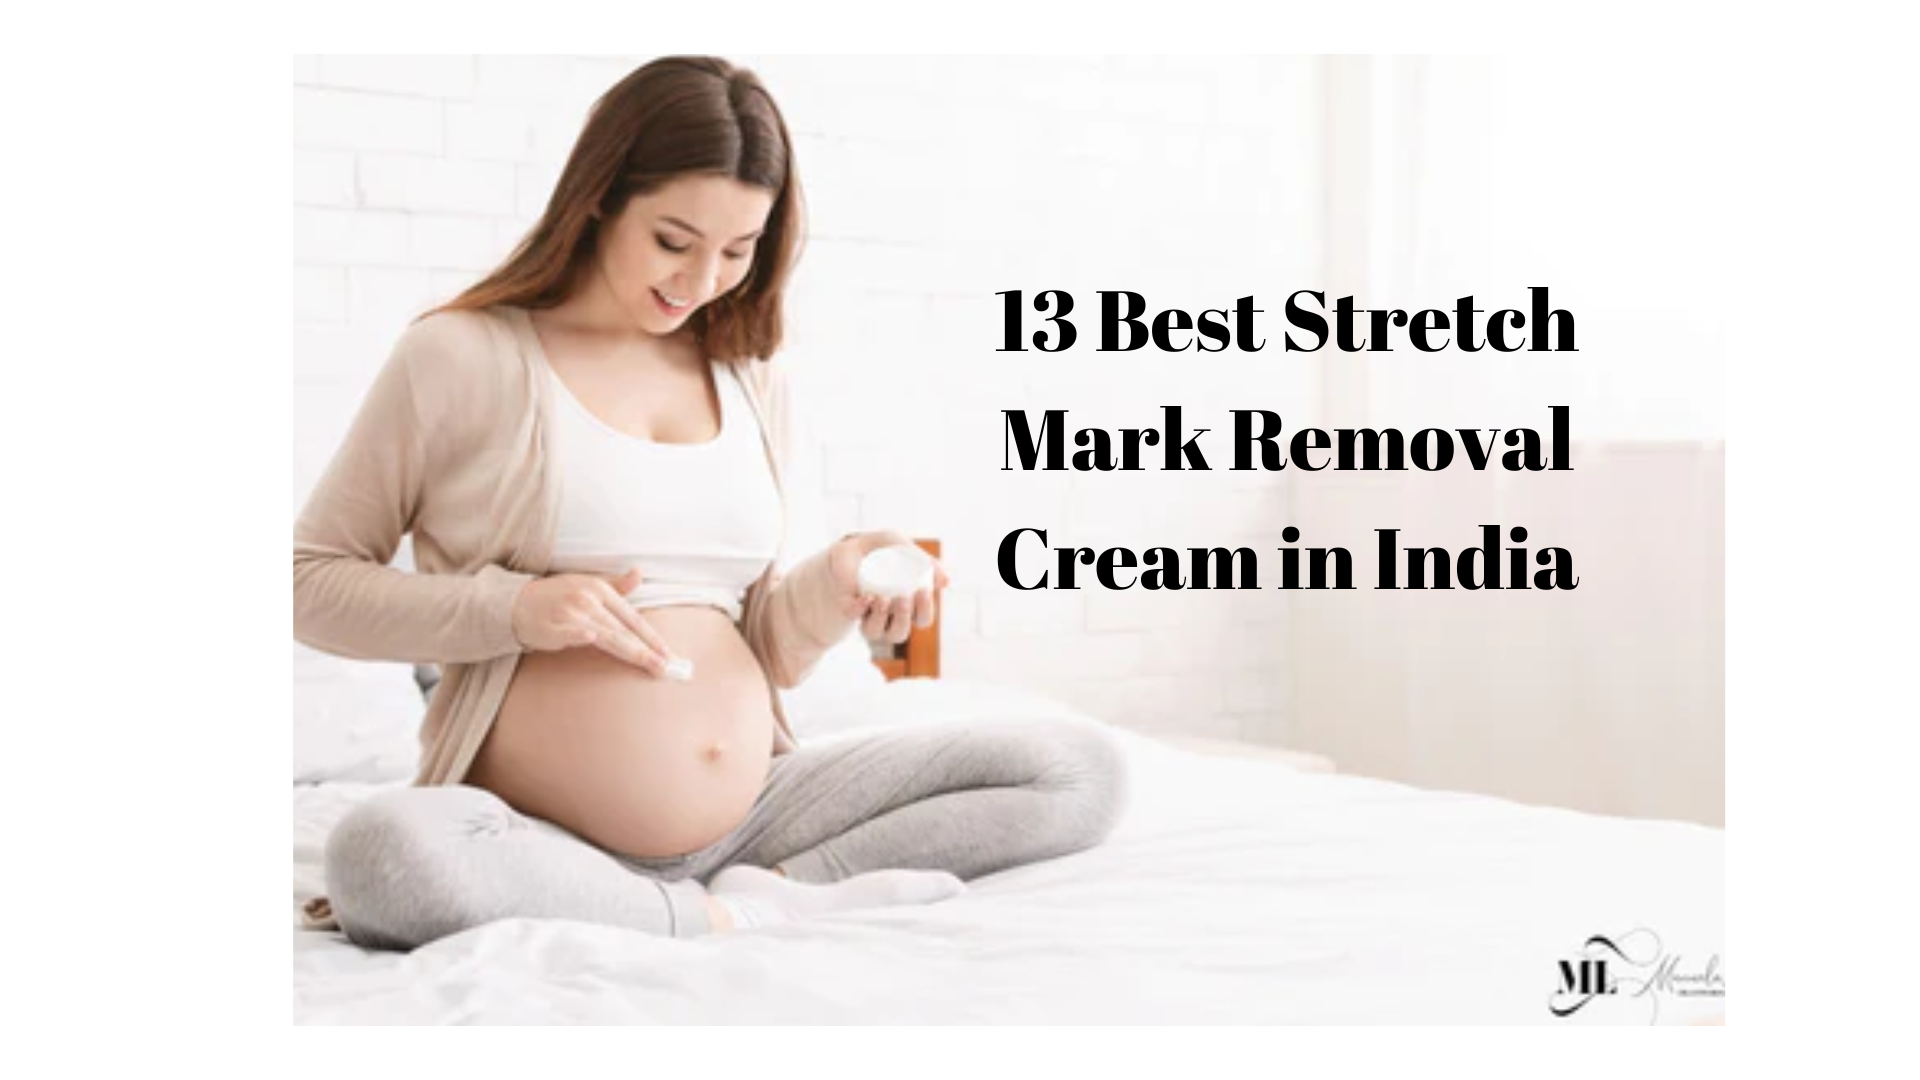 13 Best Stretch Mark Removal Cream In India [Updated 2022]